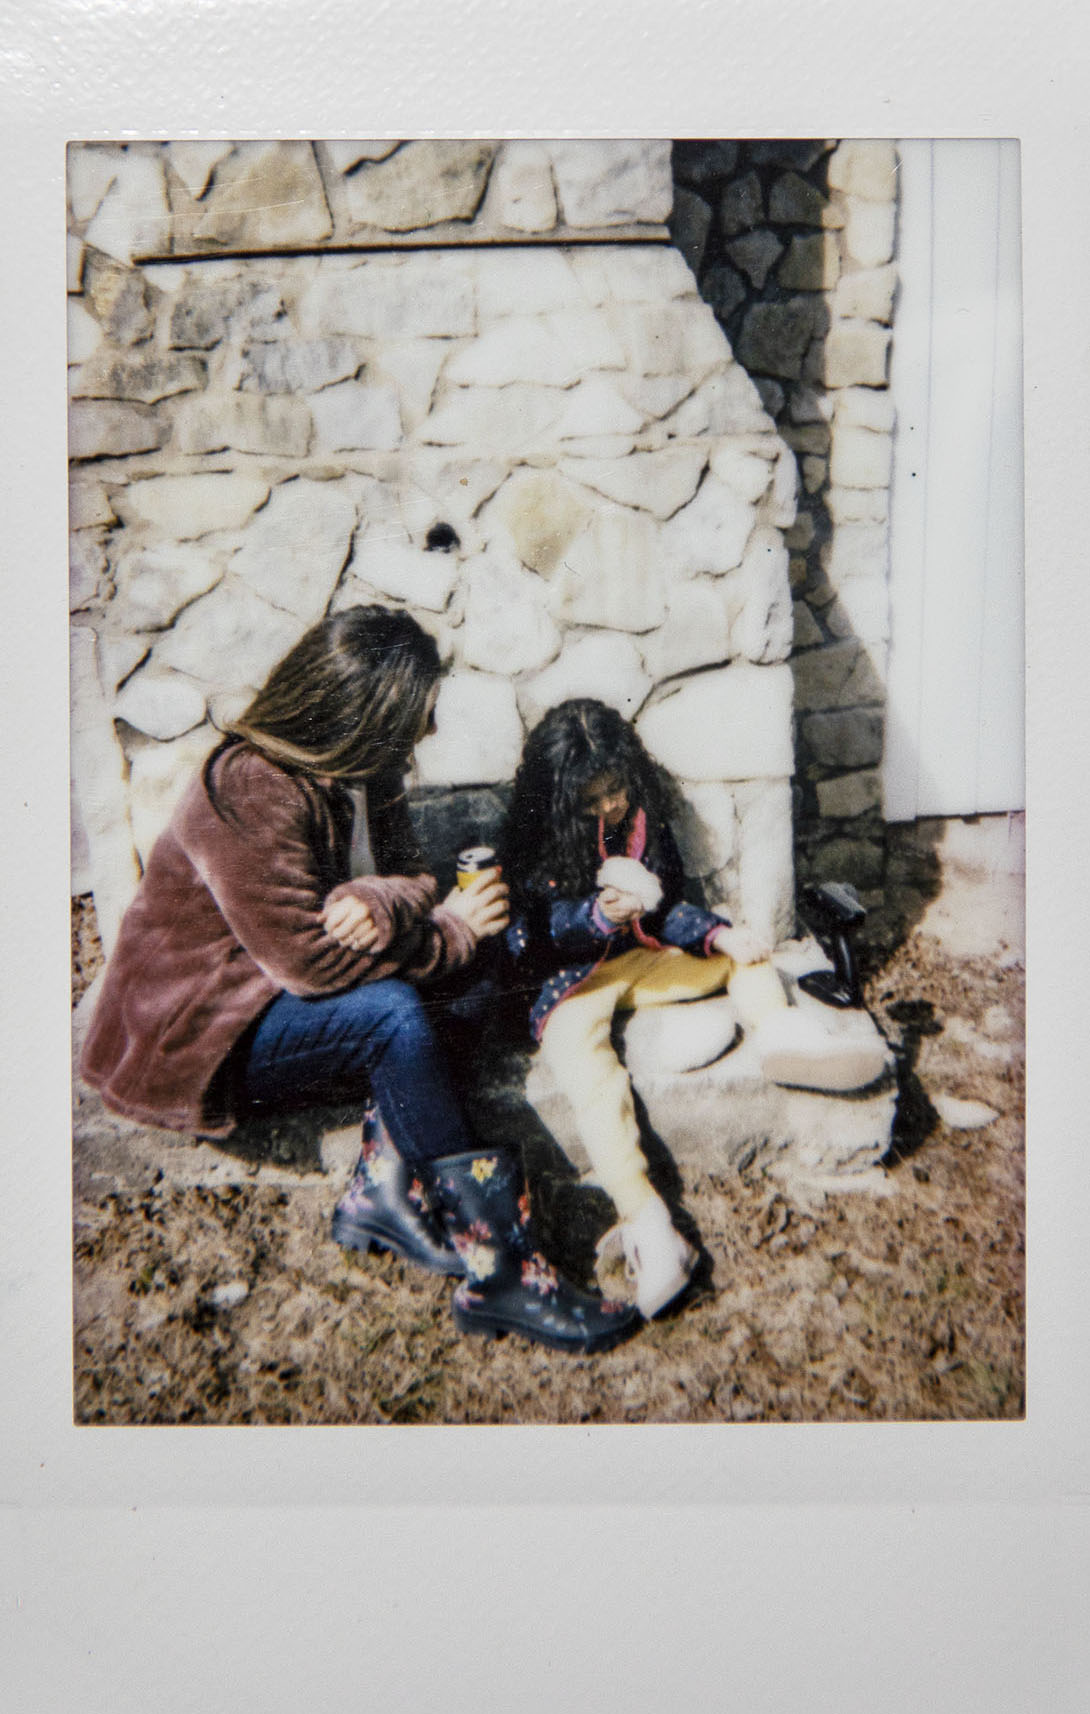 A Polaroid picture of two women looking at rocks in an outdoor setting